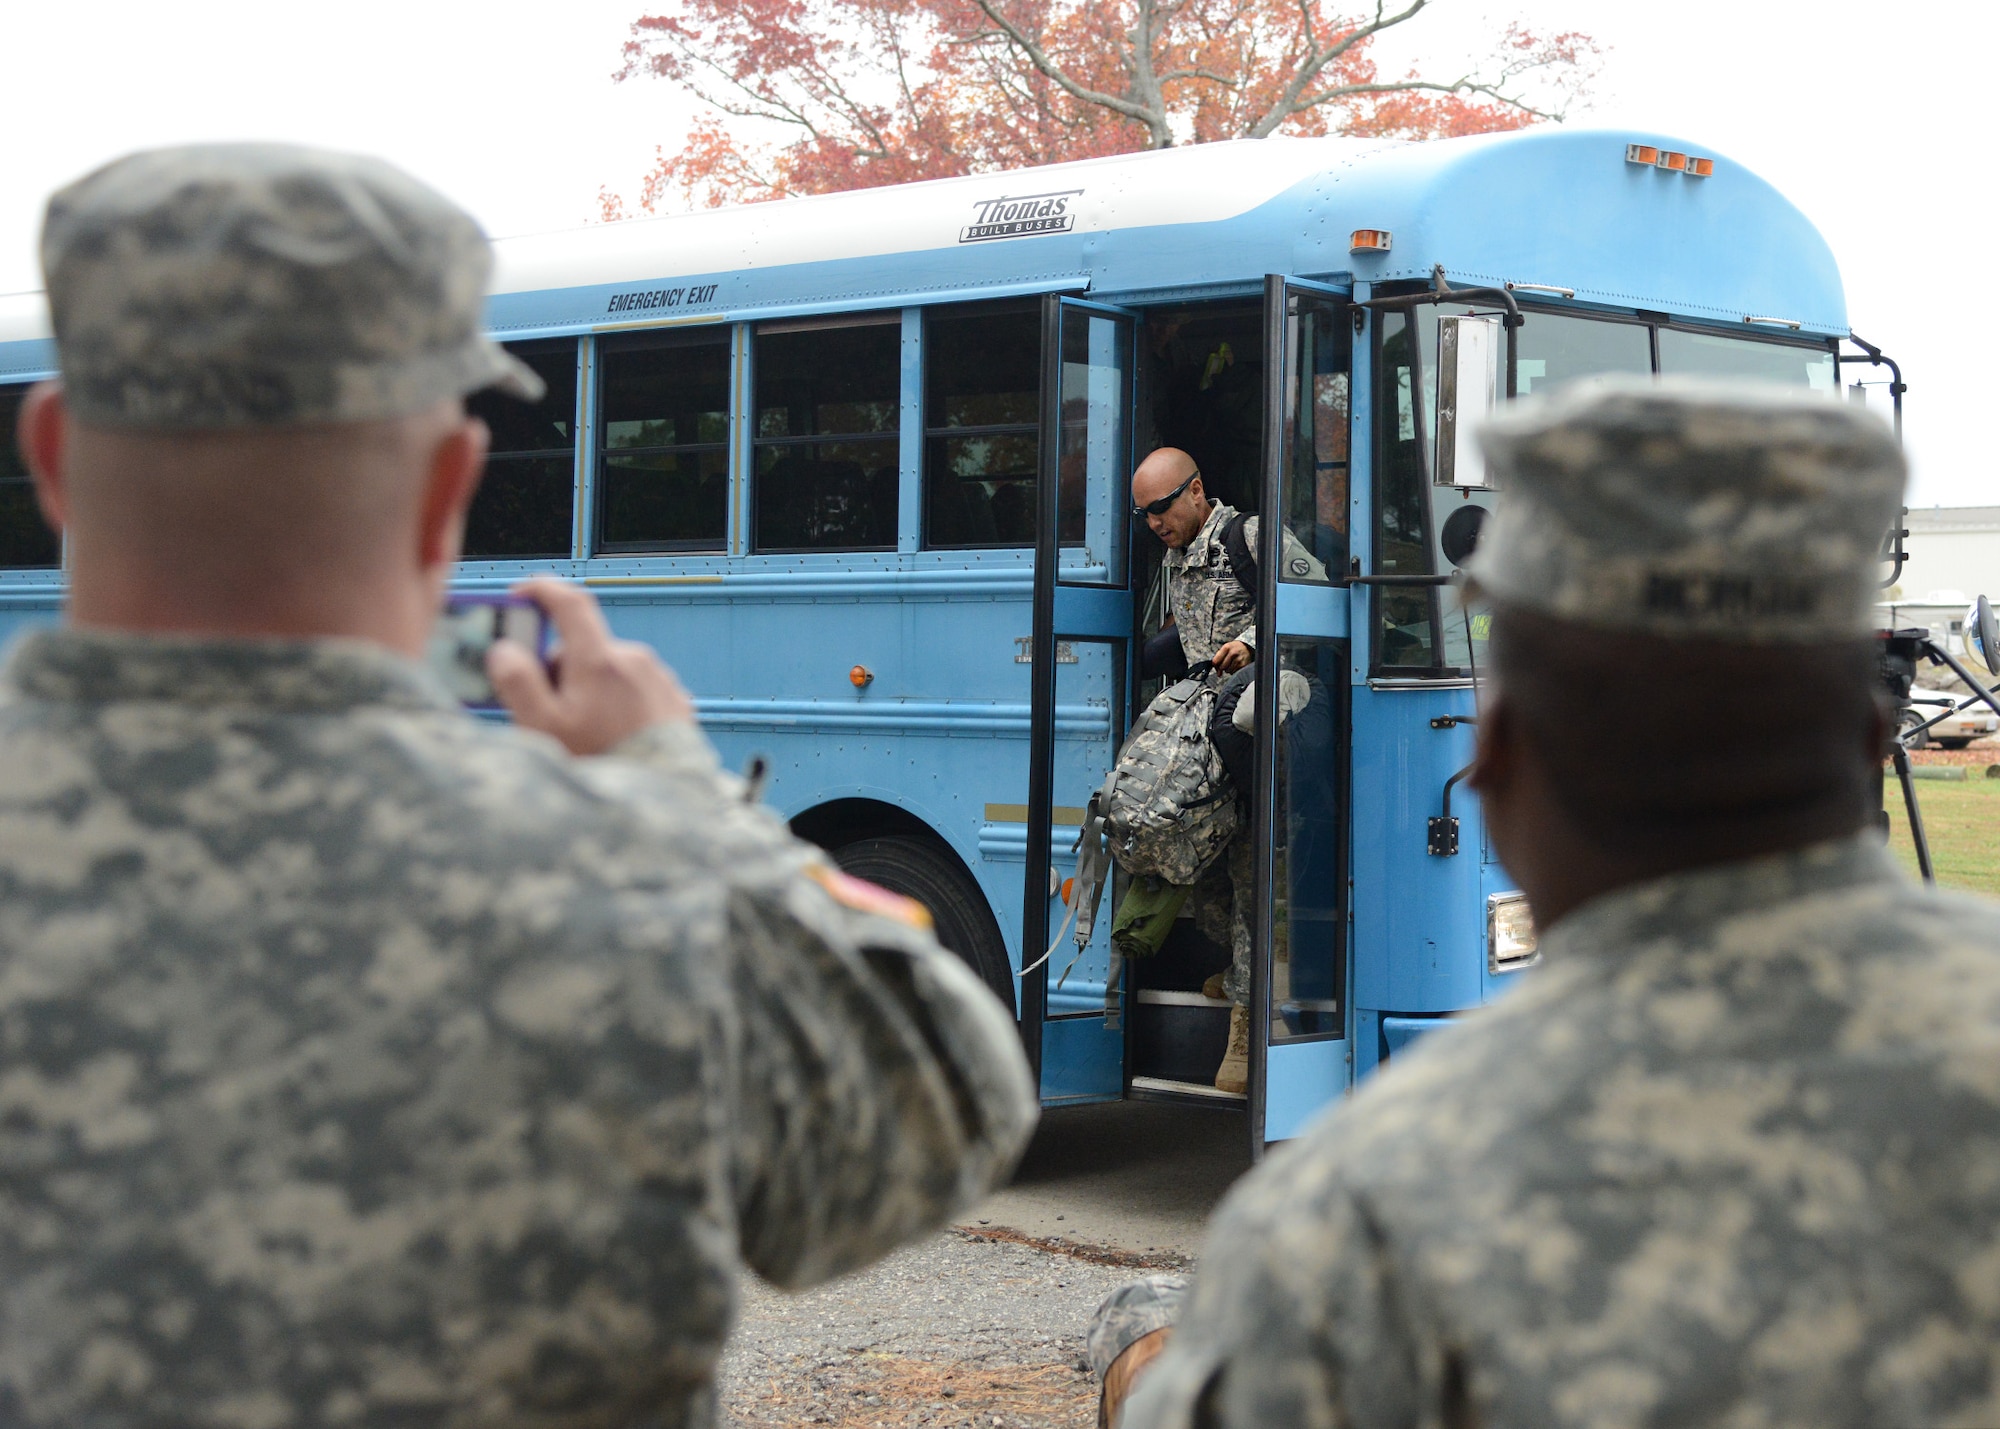 Soldiers look on as service members disembark a bus upon arrival at Langley Transit Center Nov. 13, 2014, at Langley Air Force Base, Va. Service members from multiple branches of the armed forces will undergo a 21-day controlled monitoring period at the transit center after returning from fighting the spread of Ebola in West Africa in support of Operation United Assistance. (U.S. Air Force photo/Staff Sgt. Jason J. Brown)